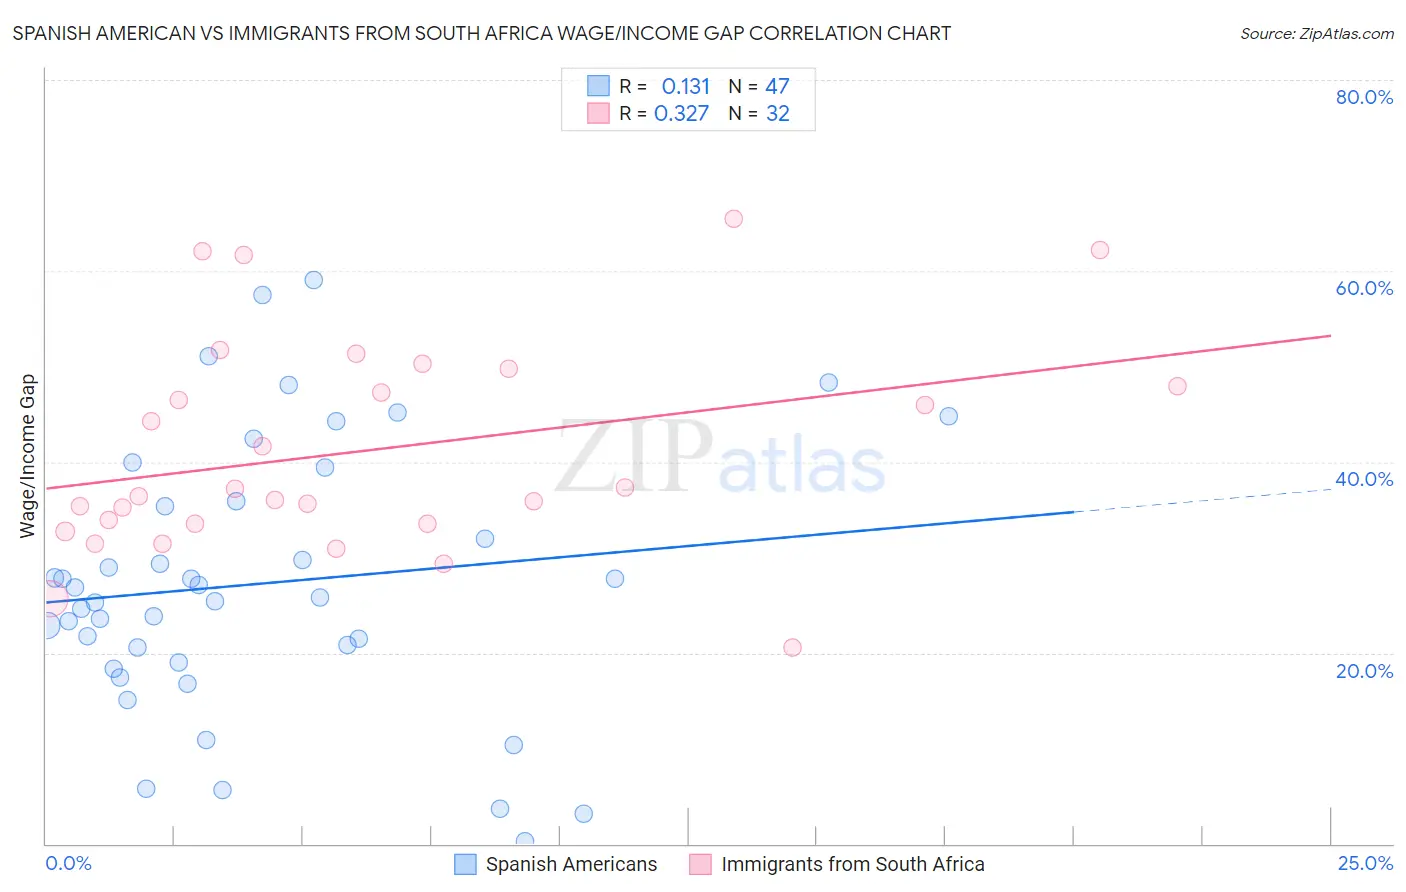 Spanish American vs Immigrants from South Africa Wage/Income Gap